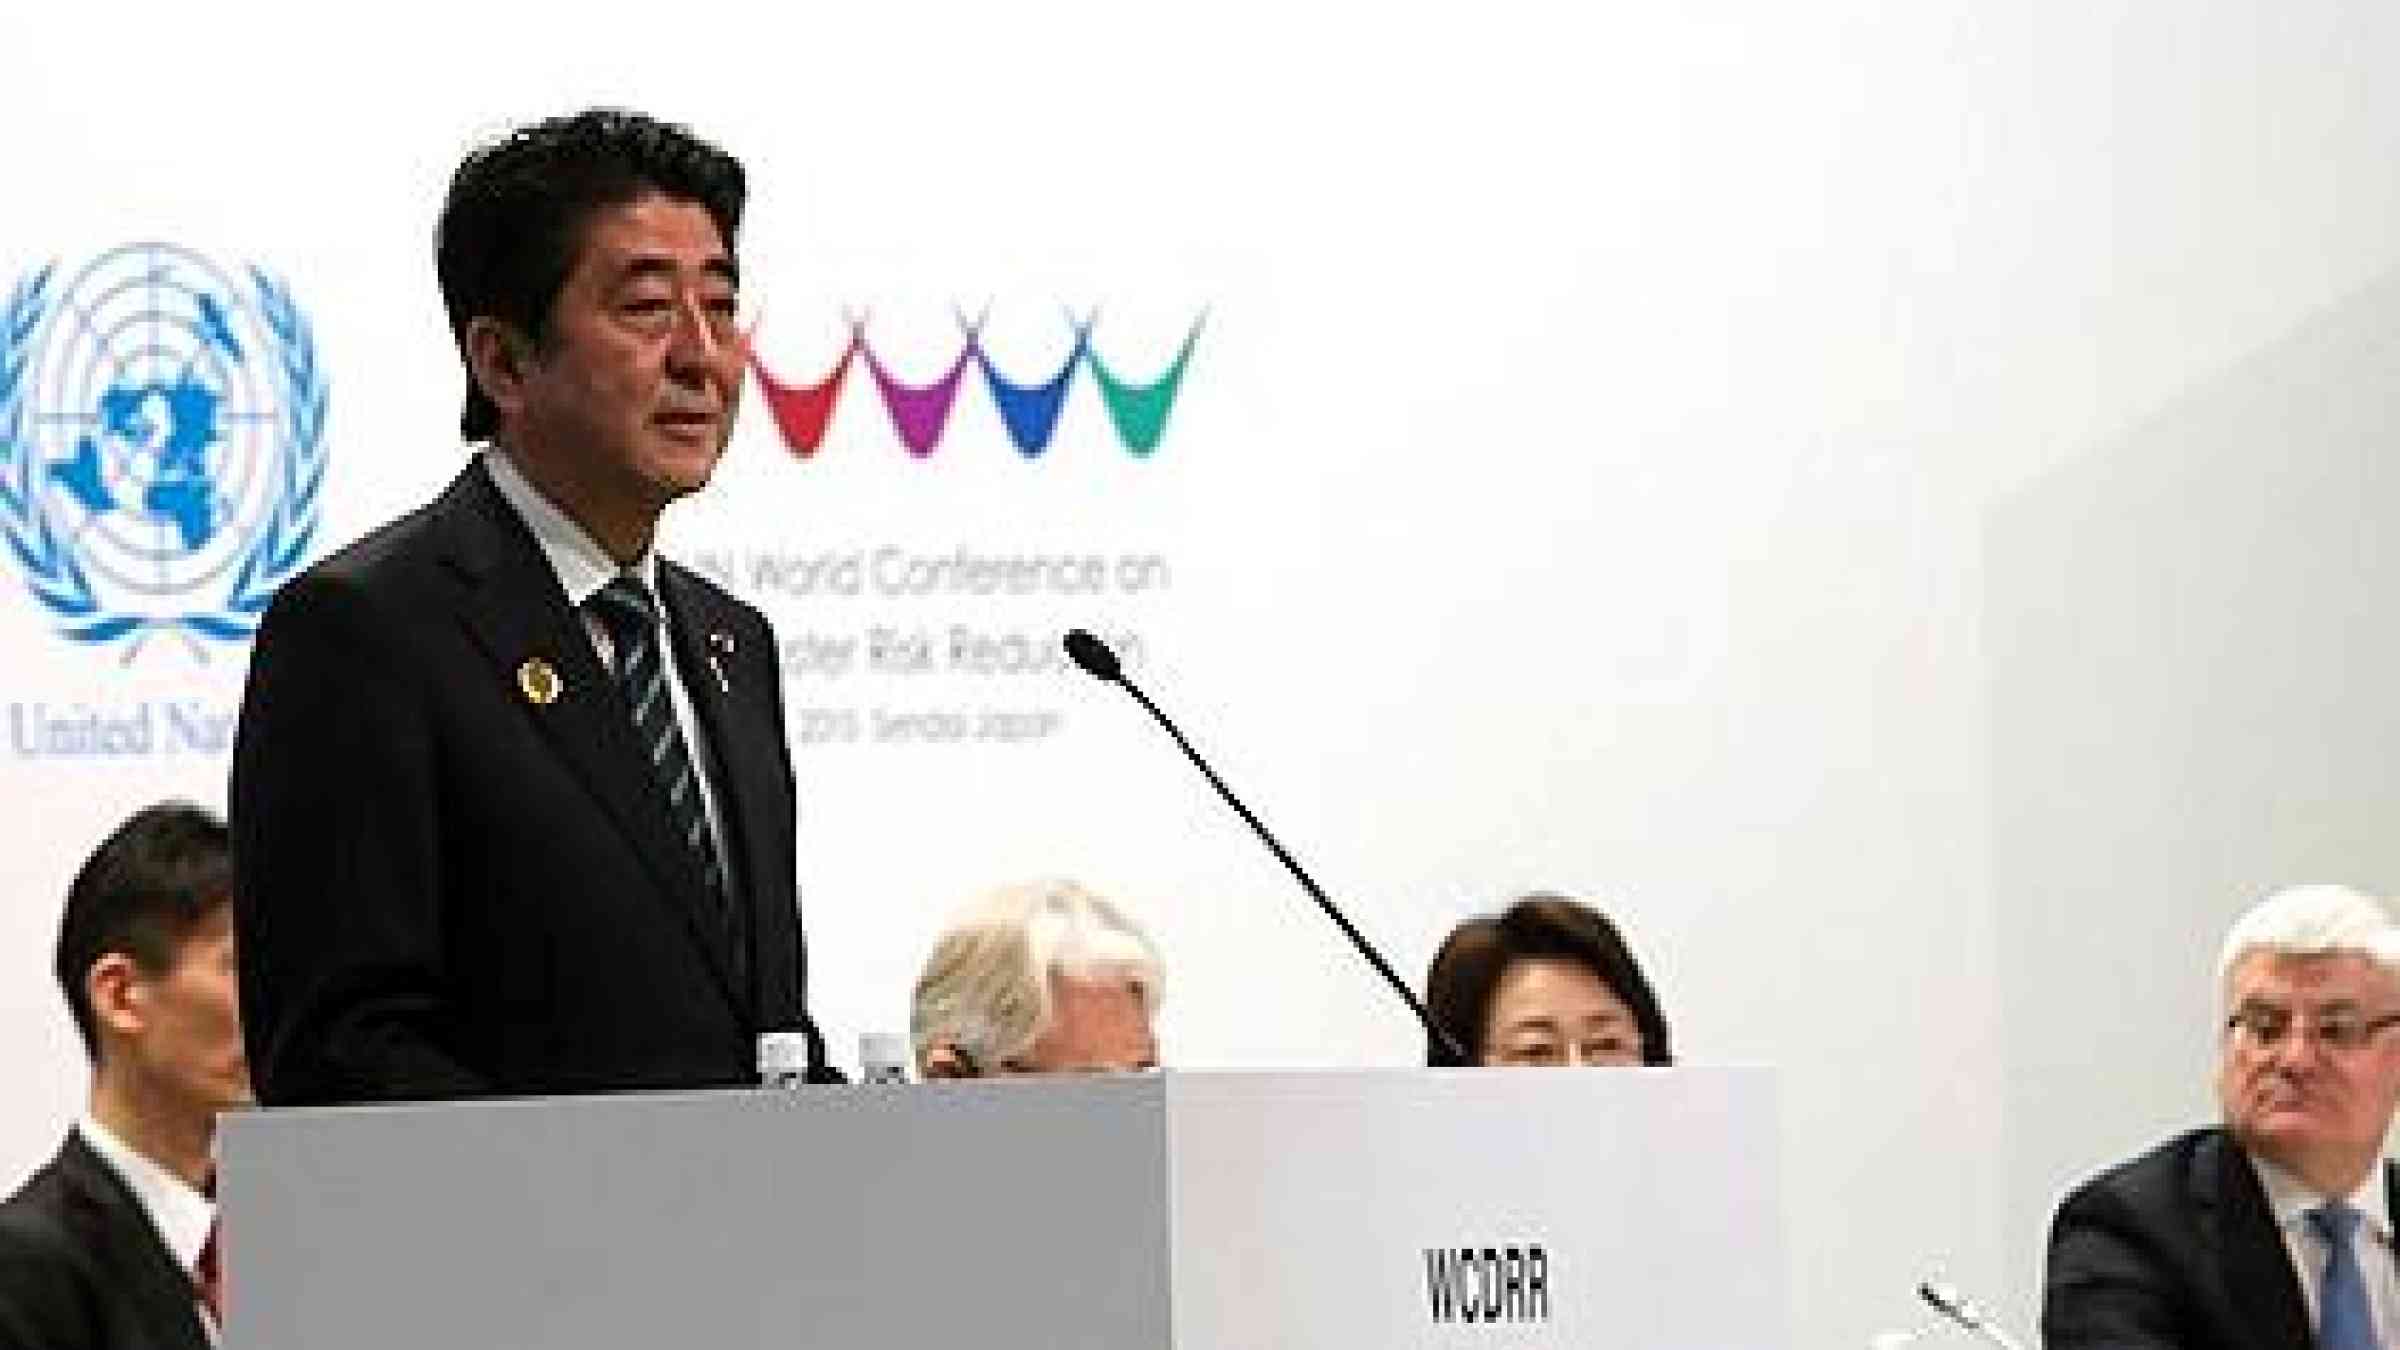 Japan's Prime Minister Mr. Shinzo Abe, speaking at the opening ceremony today of the Third UN World Conference on Disaster Risk Reduction. (Photo: UNISDR)